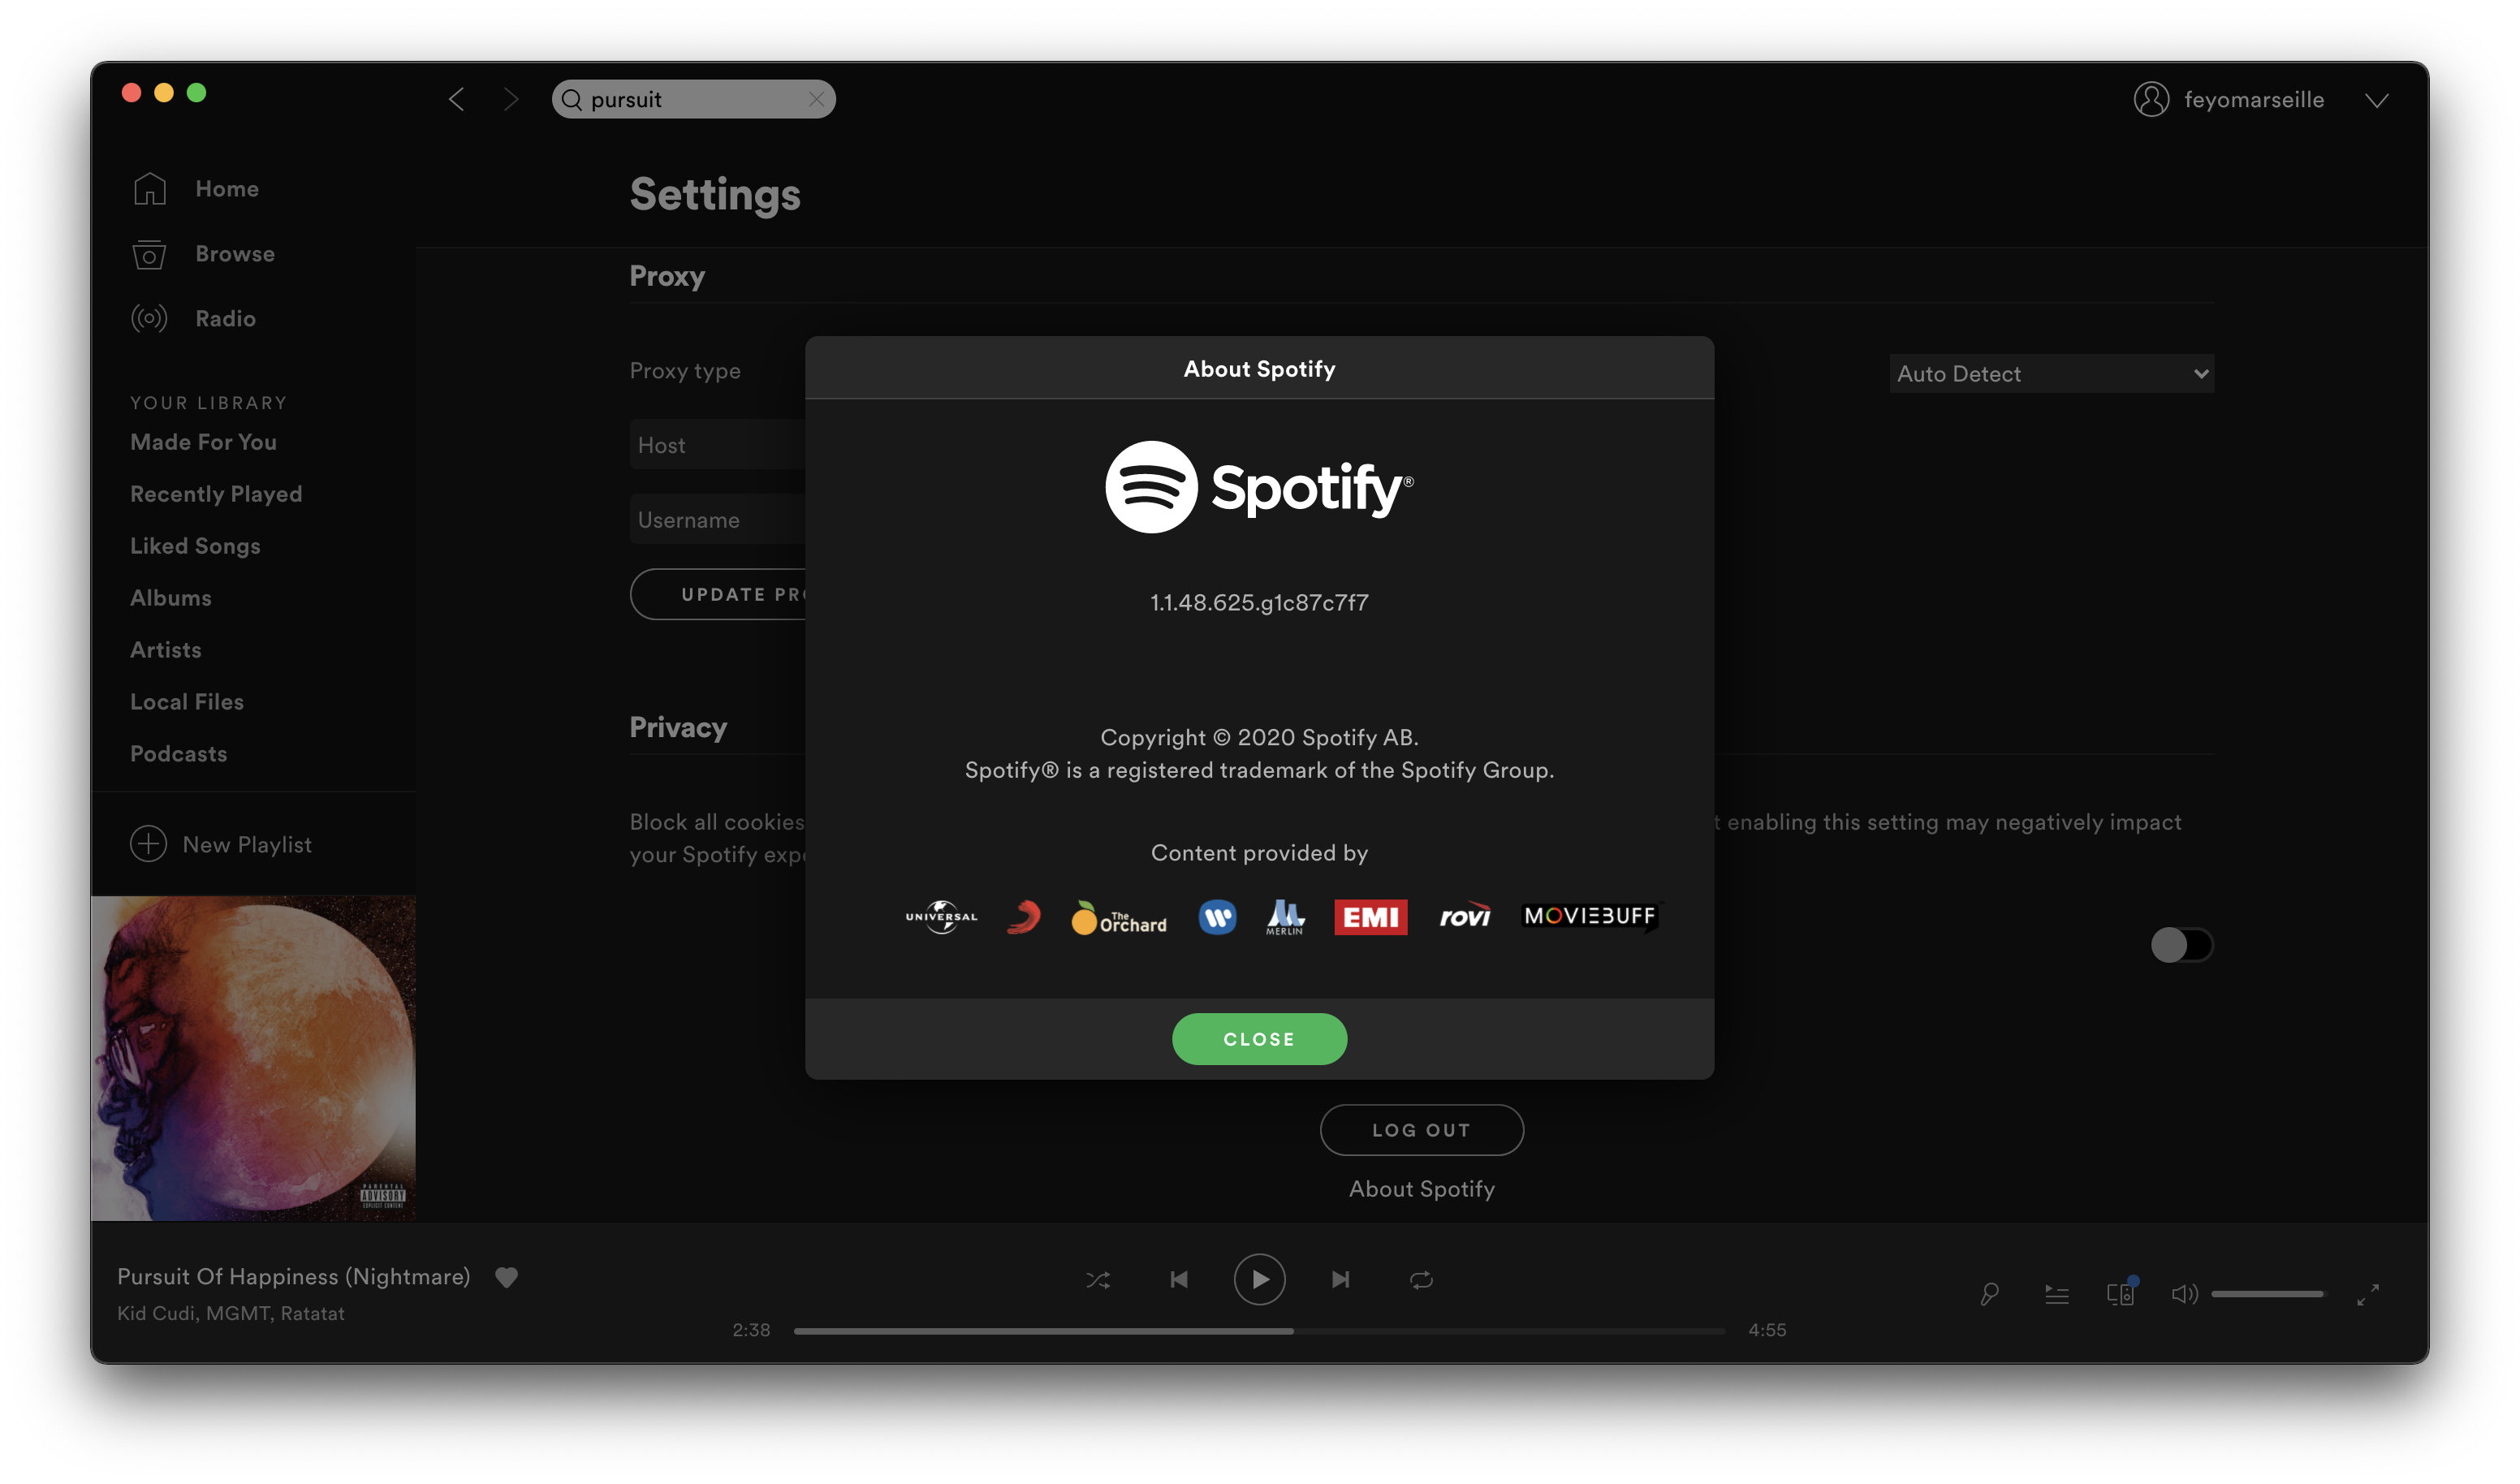 mp3 file greyed out when trying to import local f... - The Spotify Community